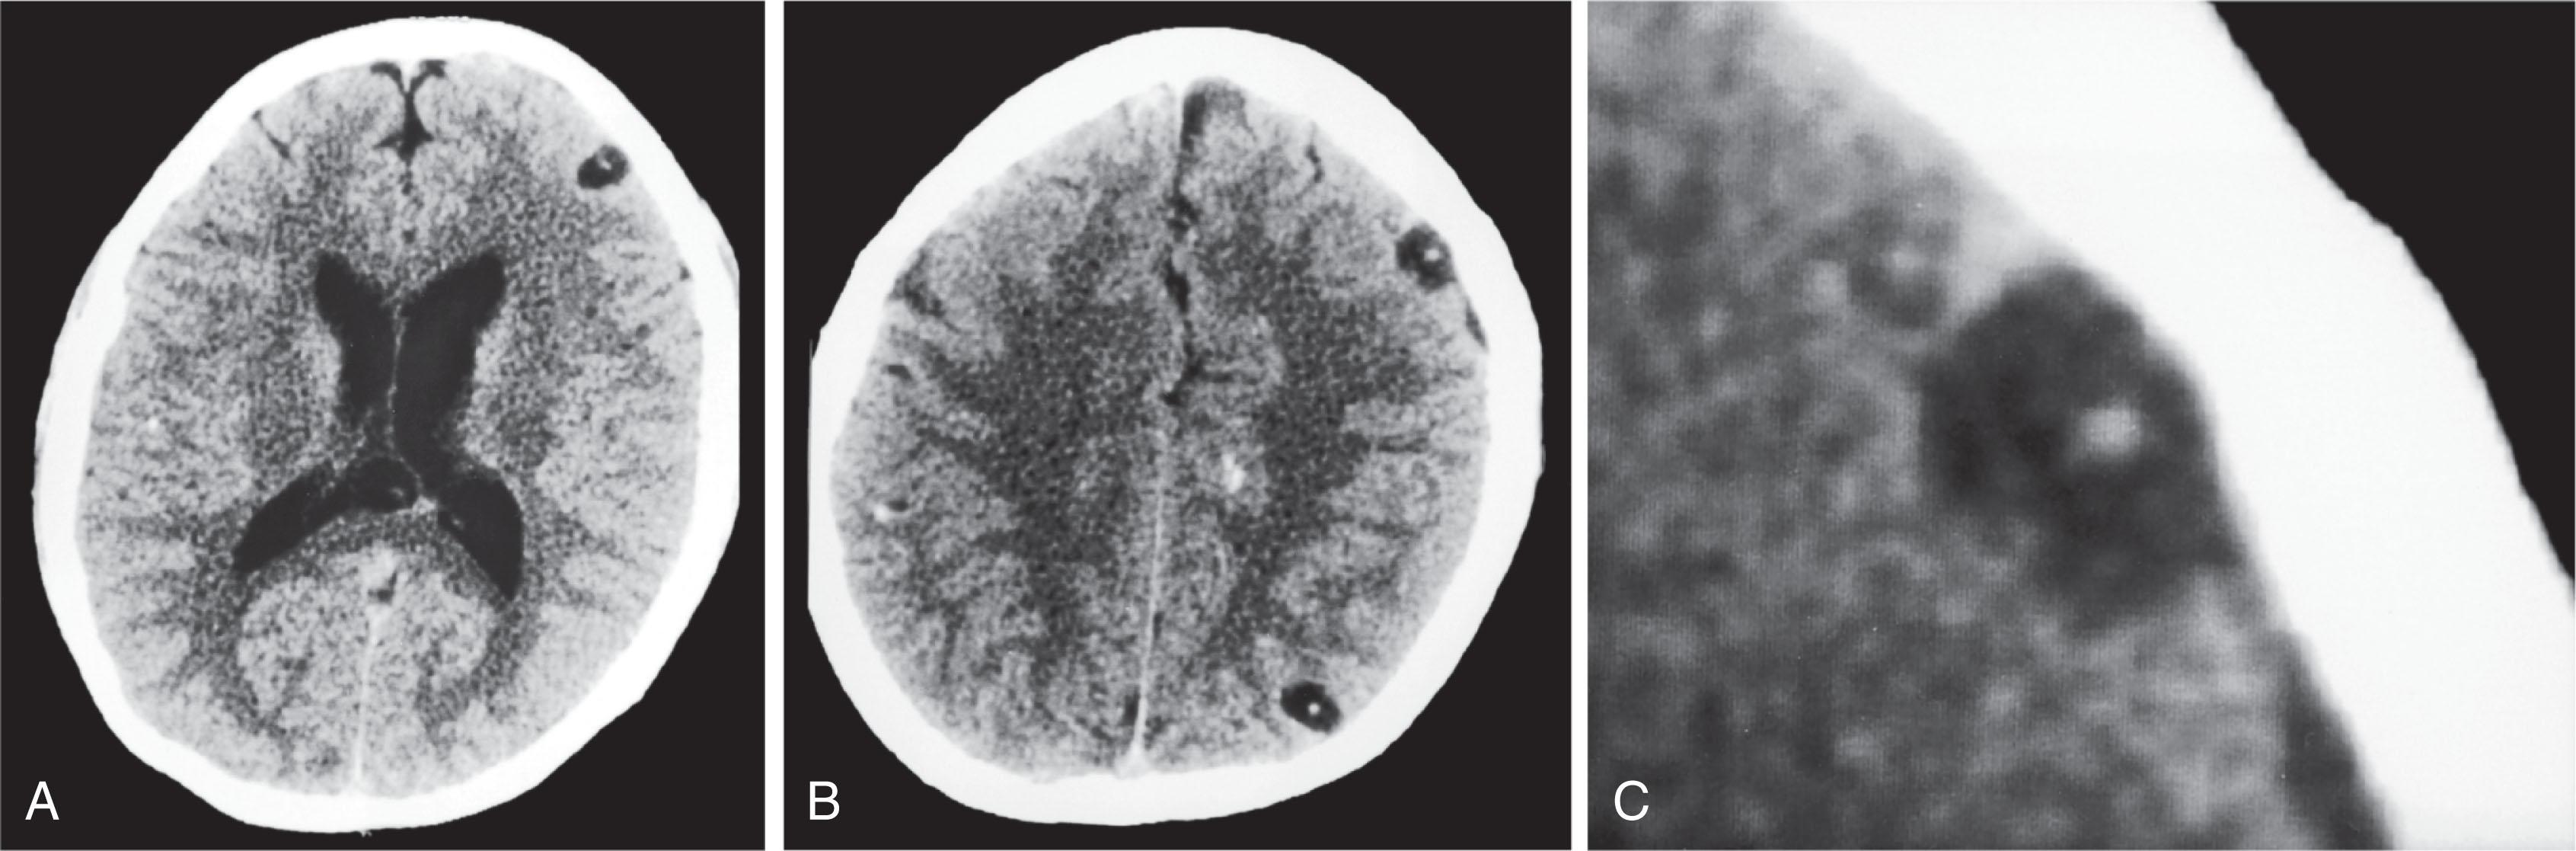 Fig. 20.12, This CT shows multiple cerebral lesions—from cysticercosis—at two levels in the cerebrum (A and B) and an enlargement of the frontal cortex lesion (C). In contrast to toxoplasmosis lesions ( Fig. 20.11 ), cysticercosis lesions are usually situated in the cerebral cortex, contain calcification, and lack surrounding edema.